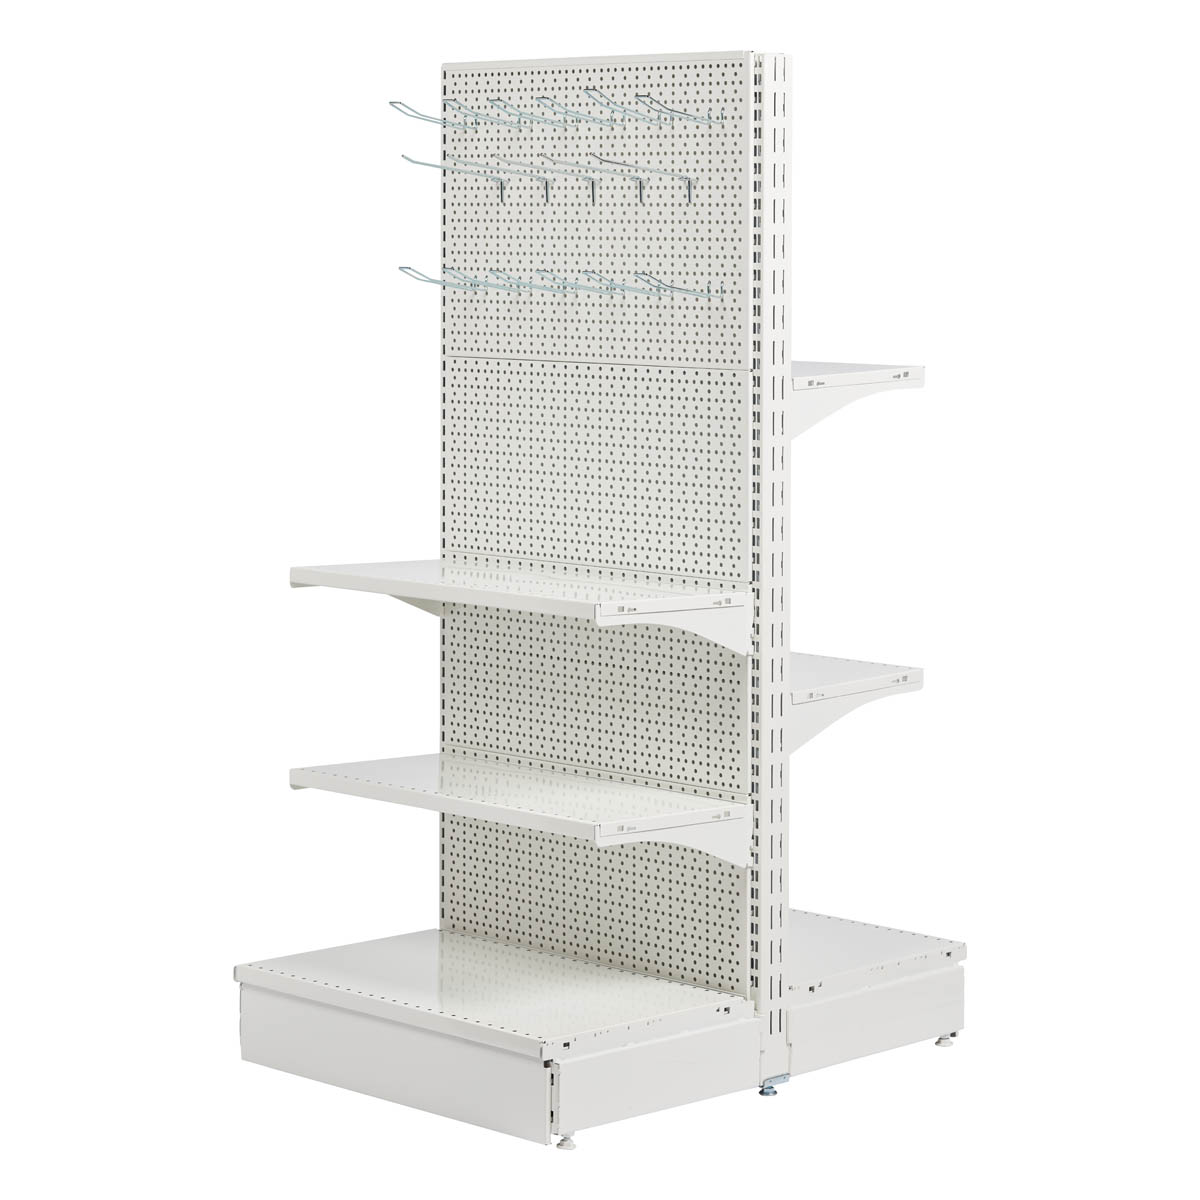 T-form gondola set with perforated back panel | Shop fittings | Geck